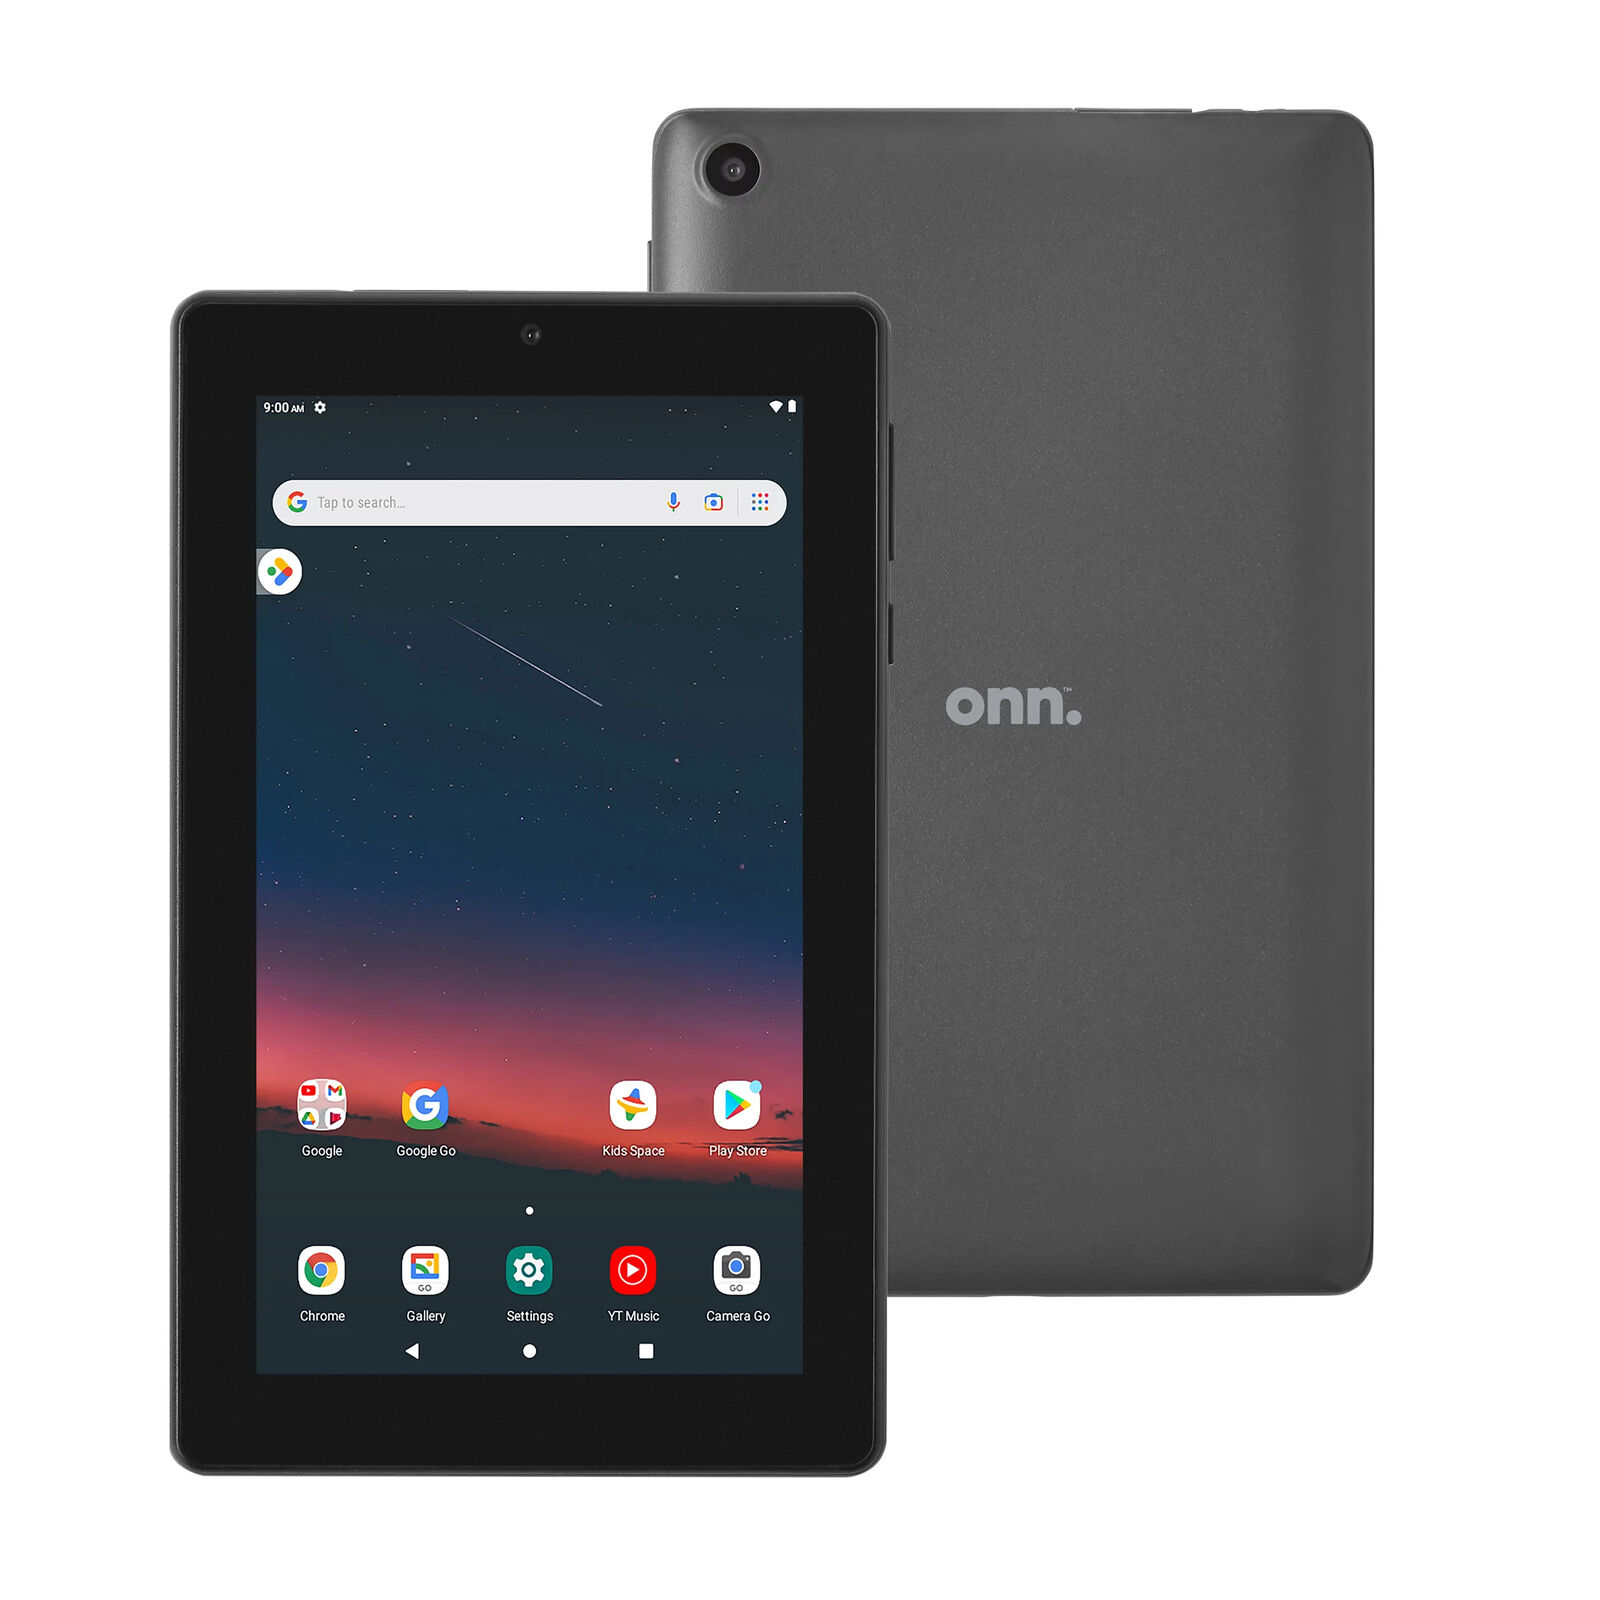 onn. 7 Tablet, 32GB (2022 Model) - Charcoal. Available Now for 49.00